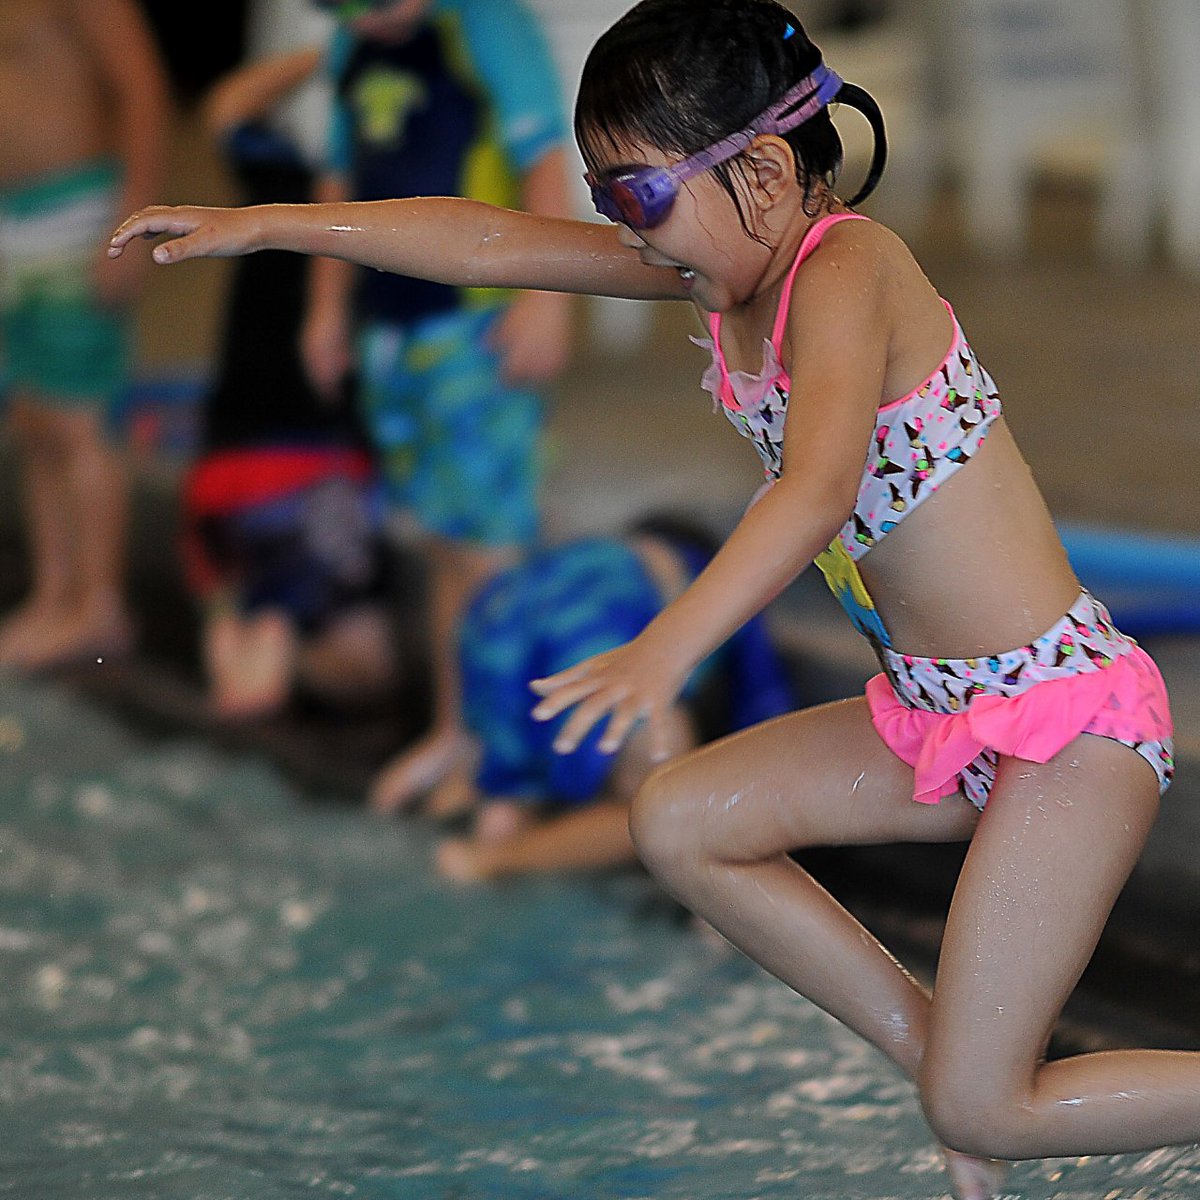 Winter Registration opens today! Register Online or at the Corvallis Community Center- Osborn is closed! 🏊
Swim Lessons and more: mtr.cool/cpljrpgsxl
Water Exercise Classes: mtr.cool/zmtyomecac